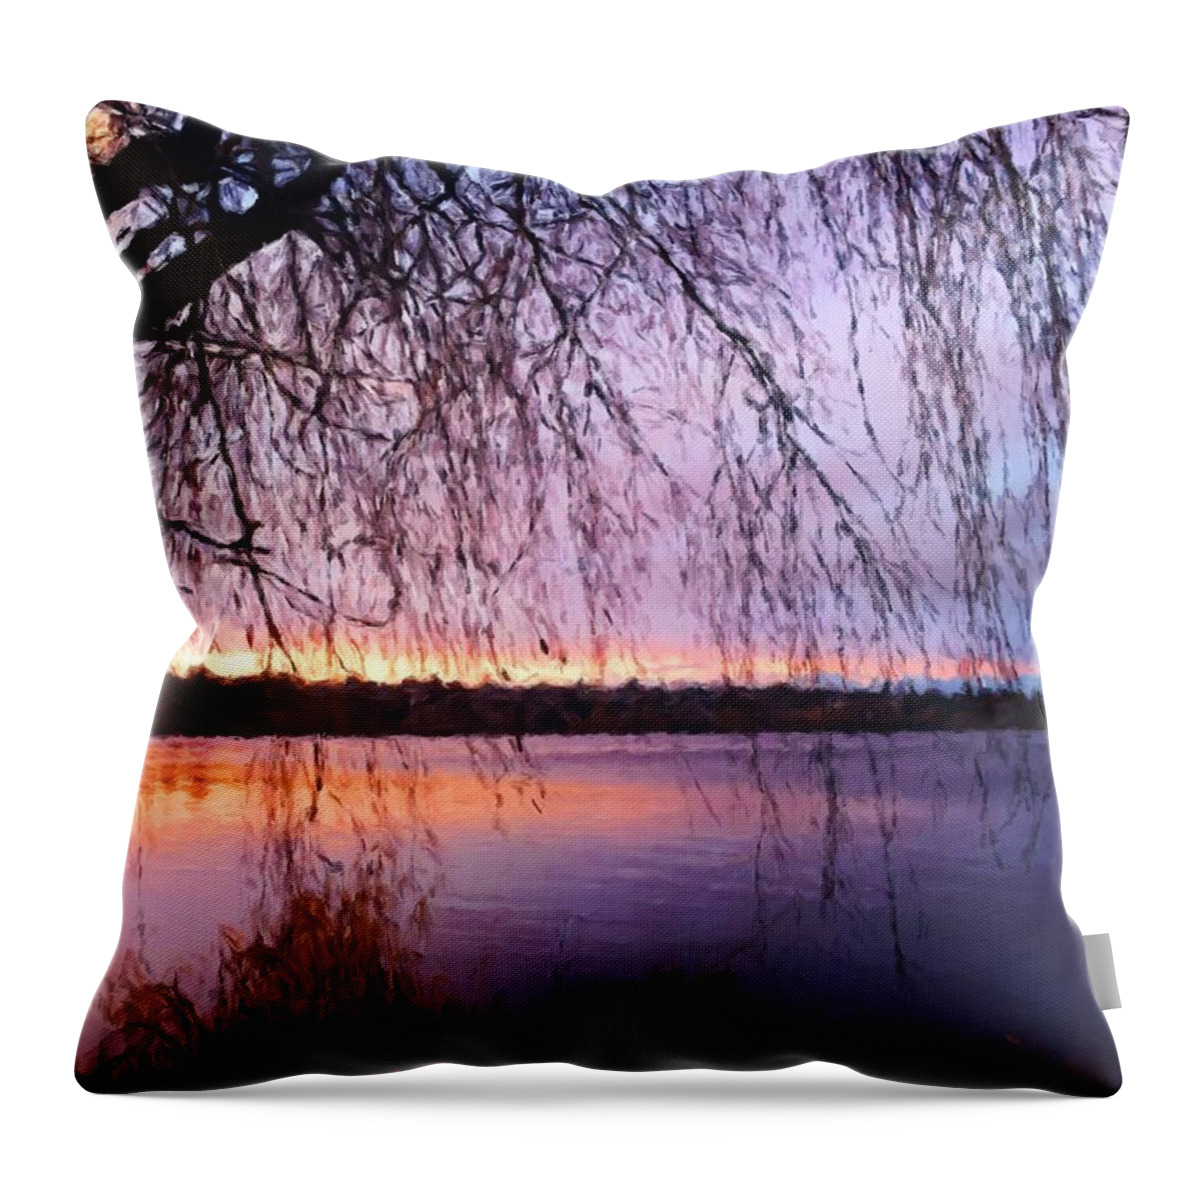 Seattle Throw Pillow featuring the digital art Weeping Tree by Paisley O'Farrell